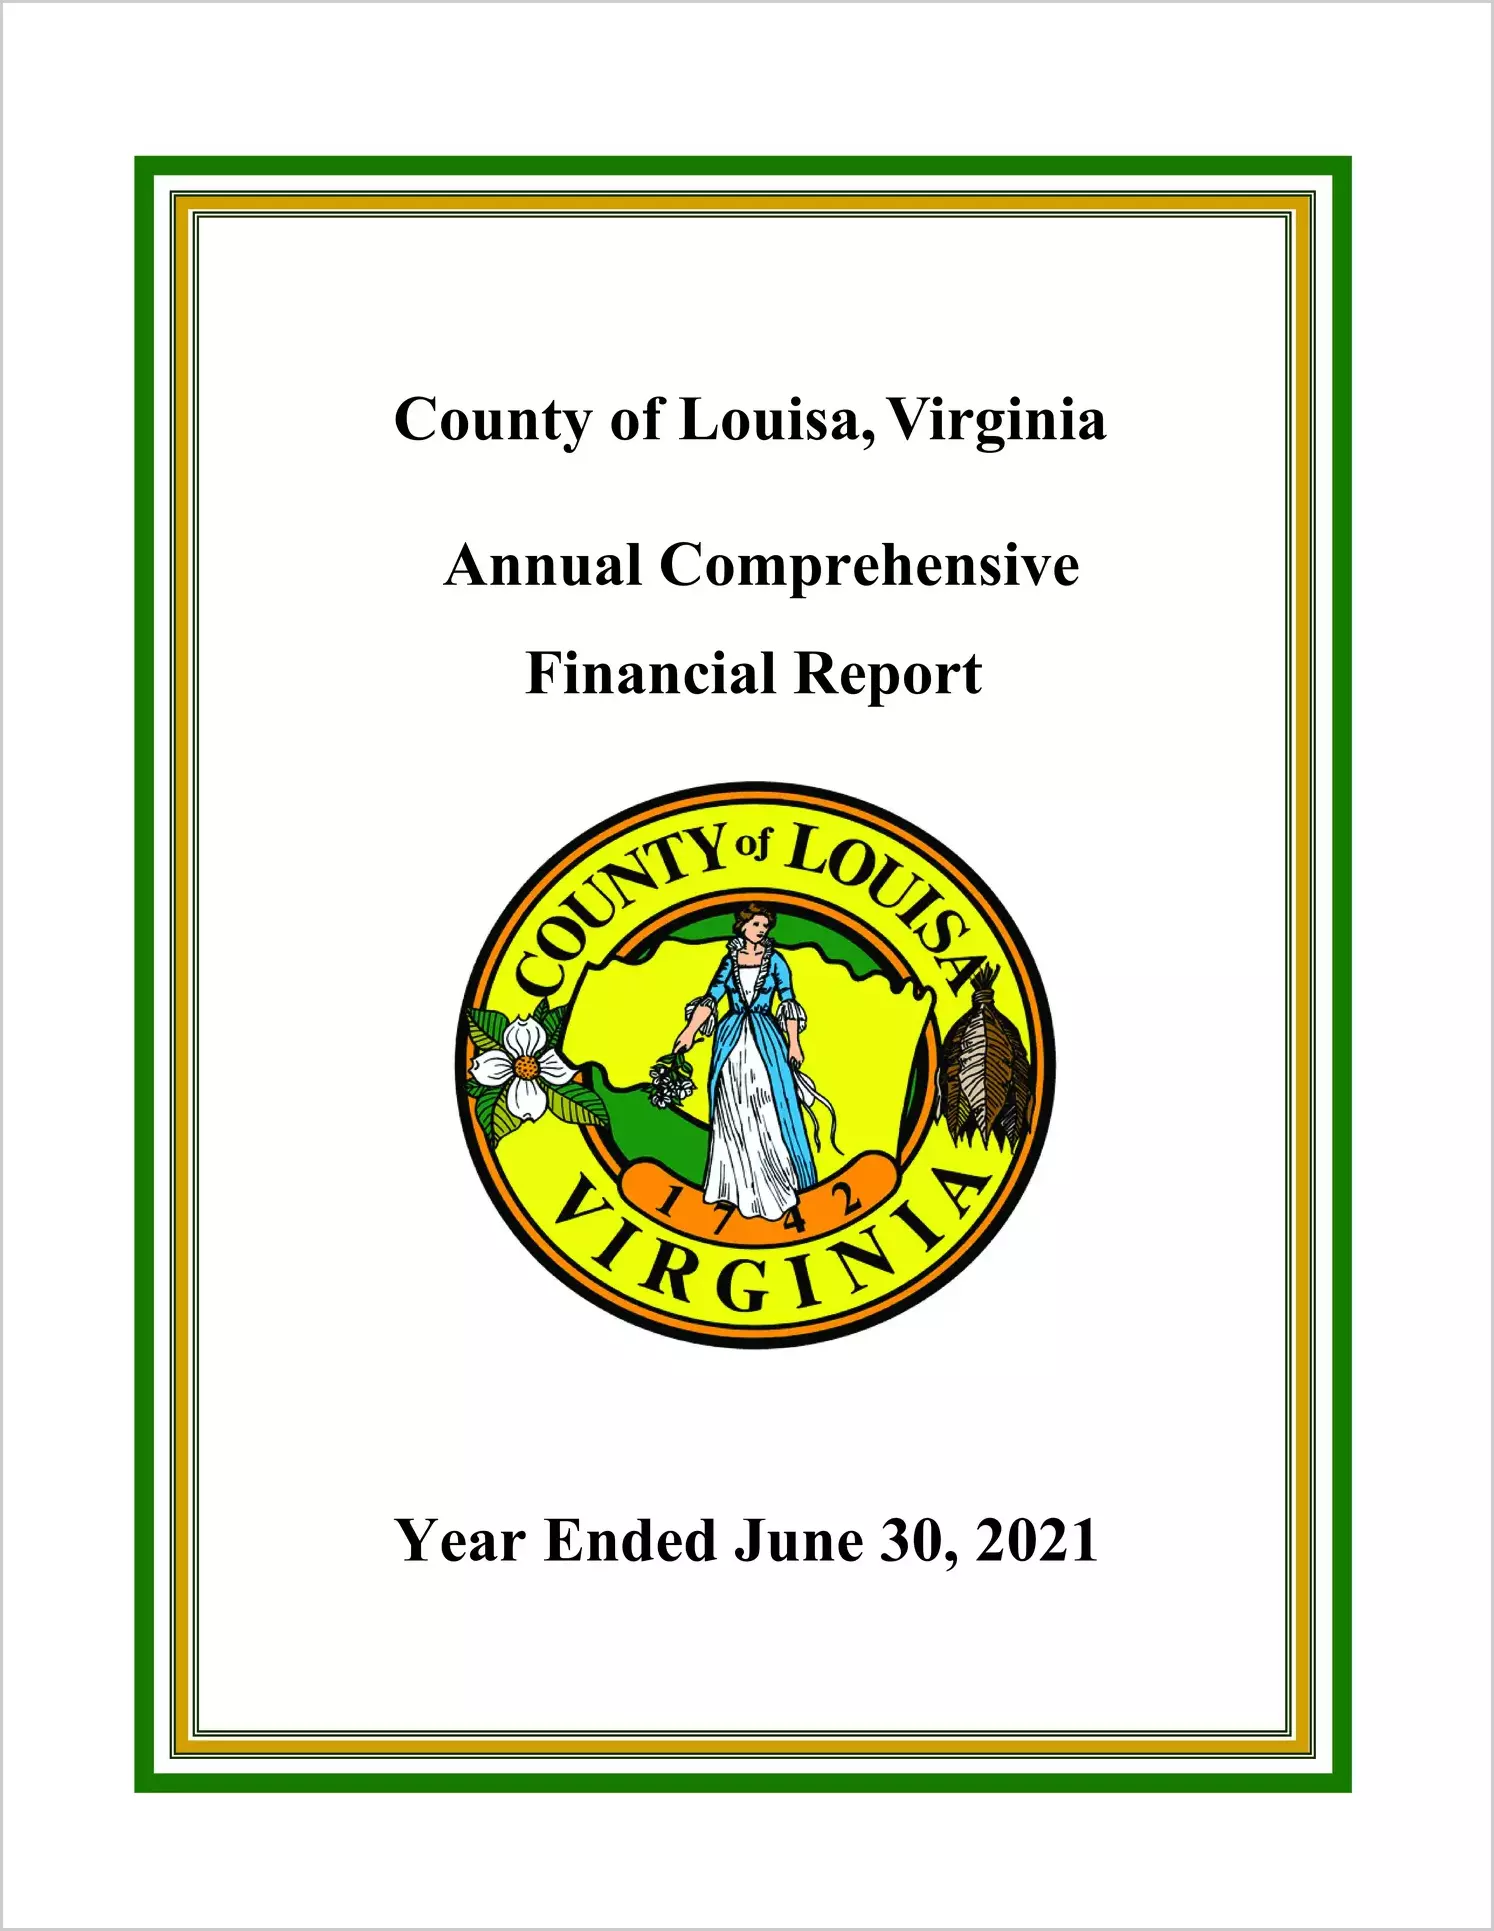 2021 Annual Financial Report for County of Louisa